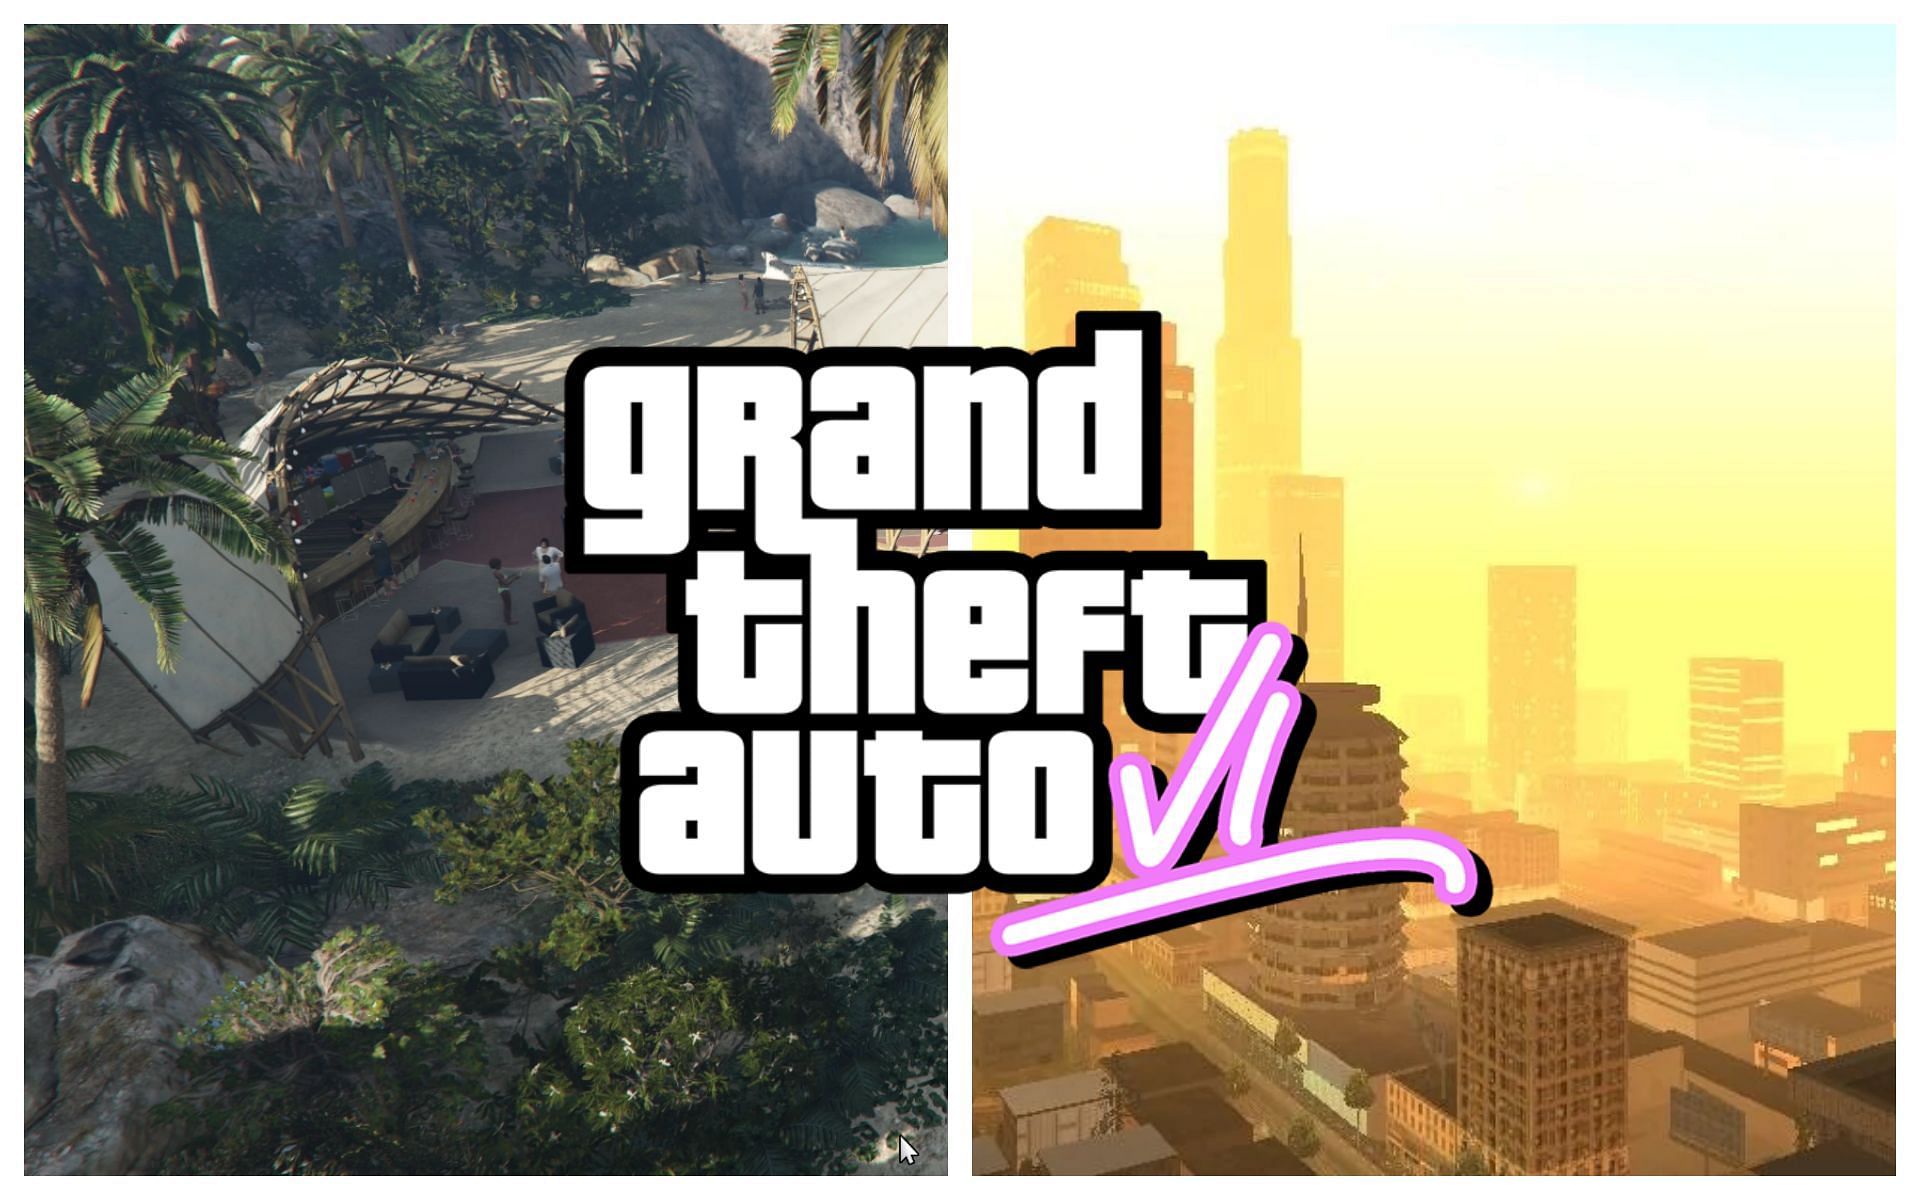 These might be locations featured in Grand Theft Auto 6 (Images via Sportskeeda)